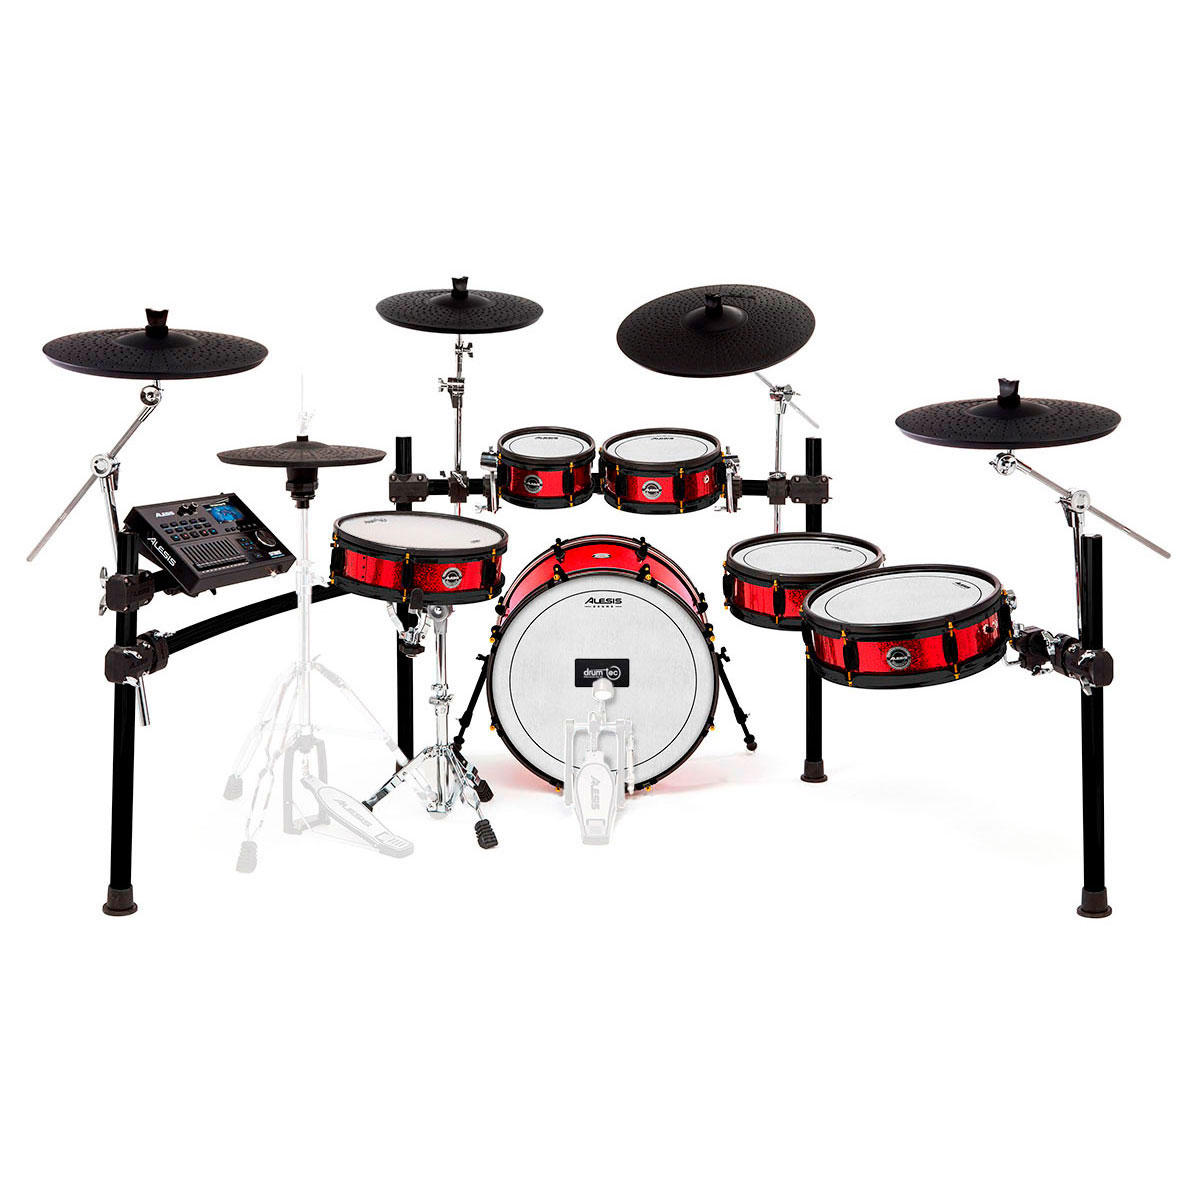 Alesis Strike Pro Kit Special Edition with 20